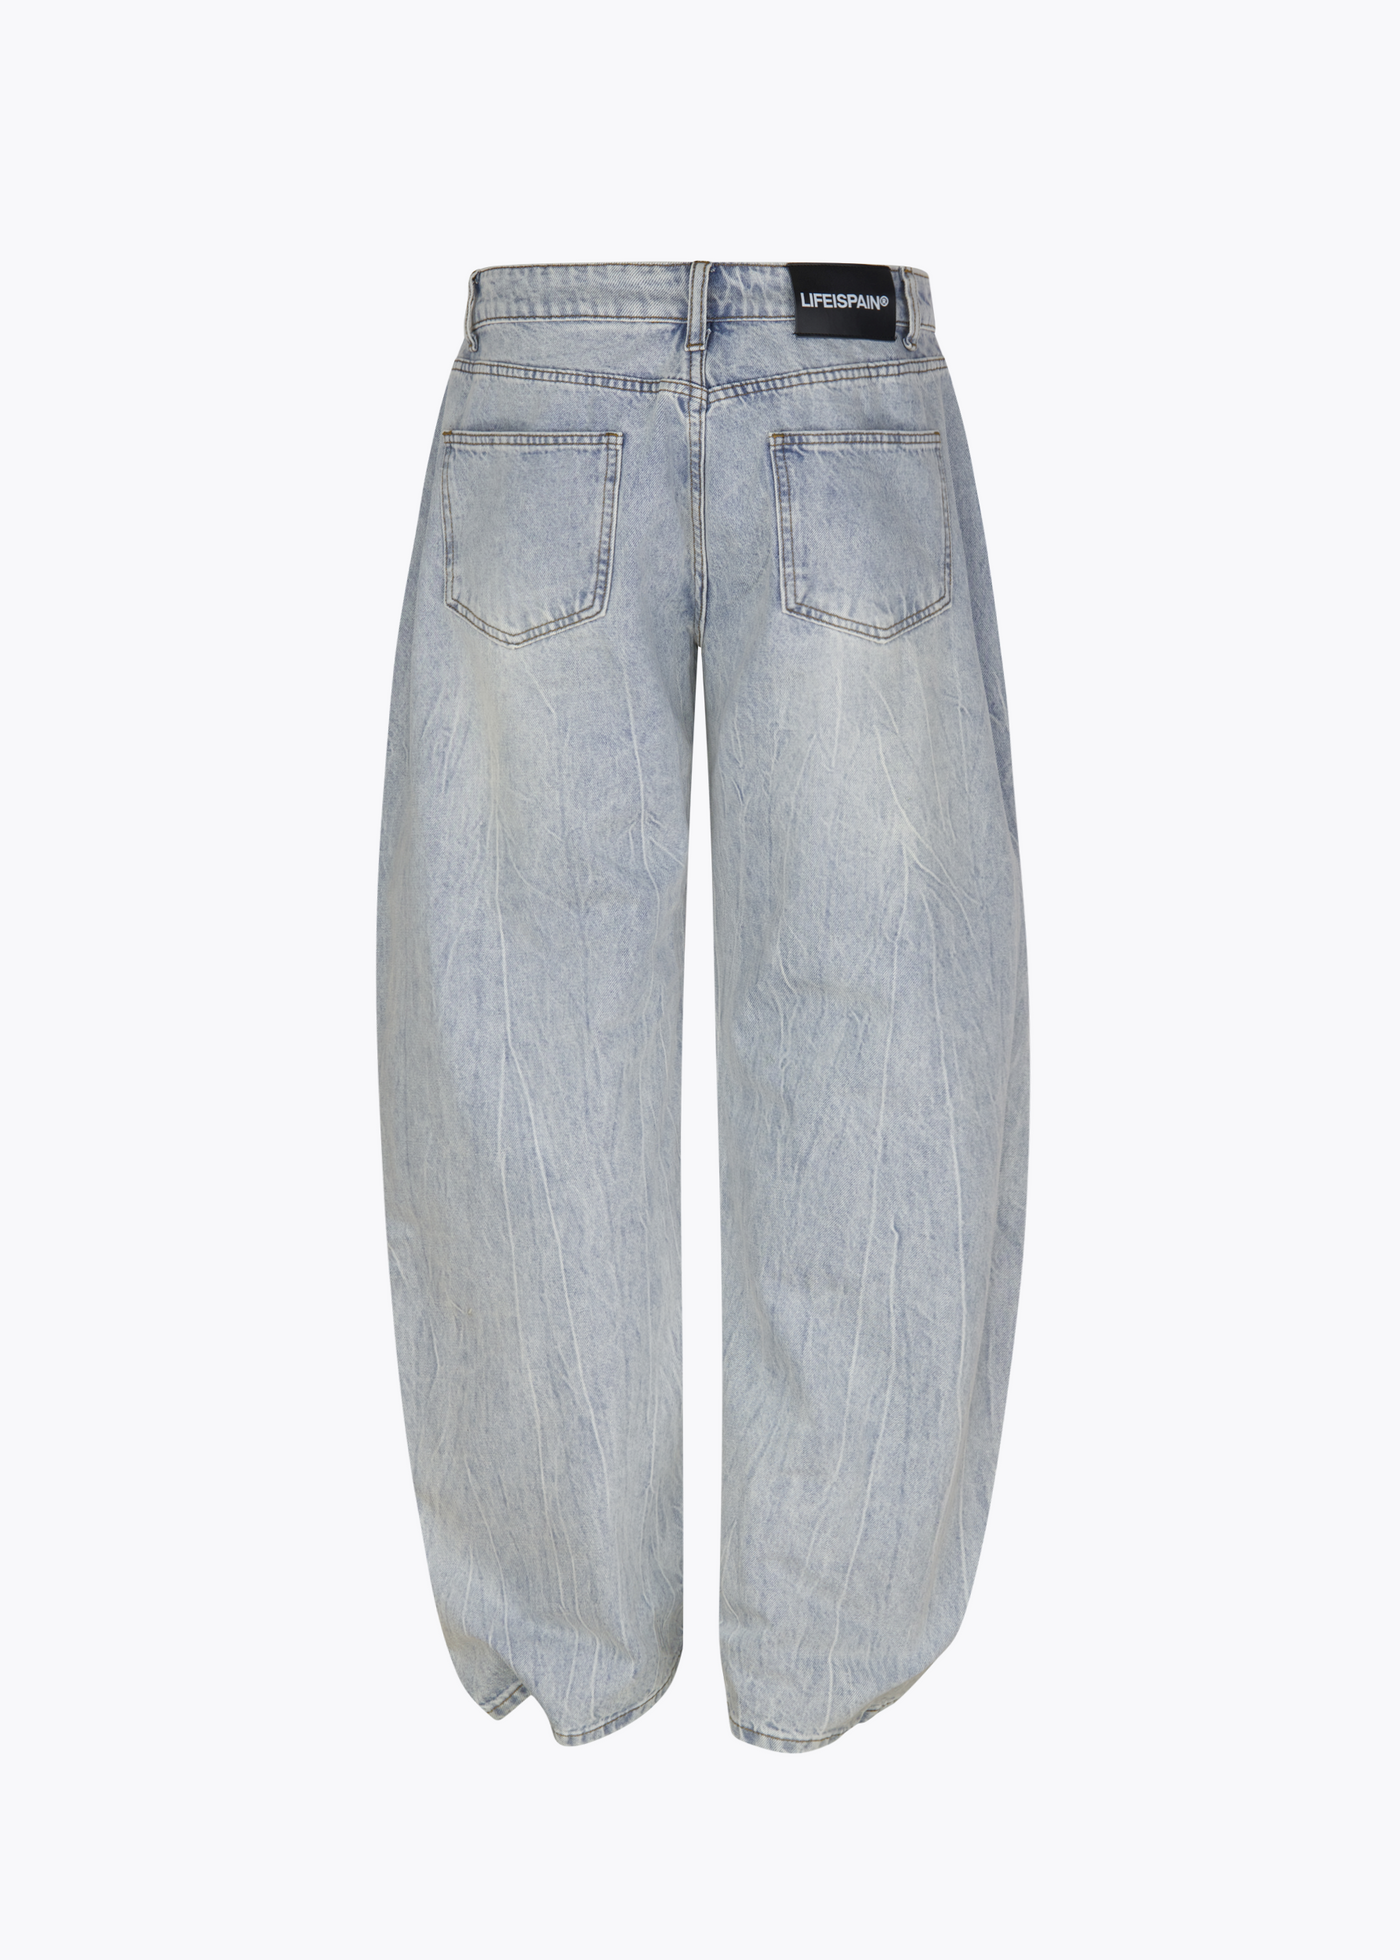 Light blue quickie jeans